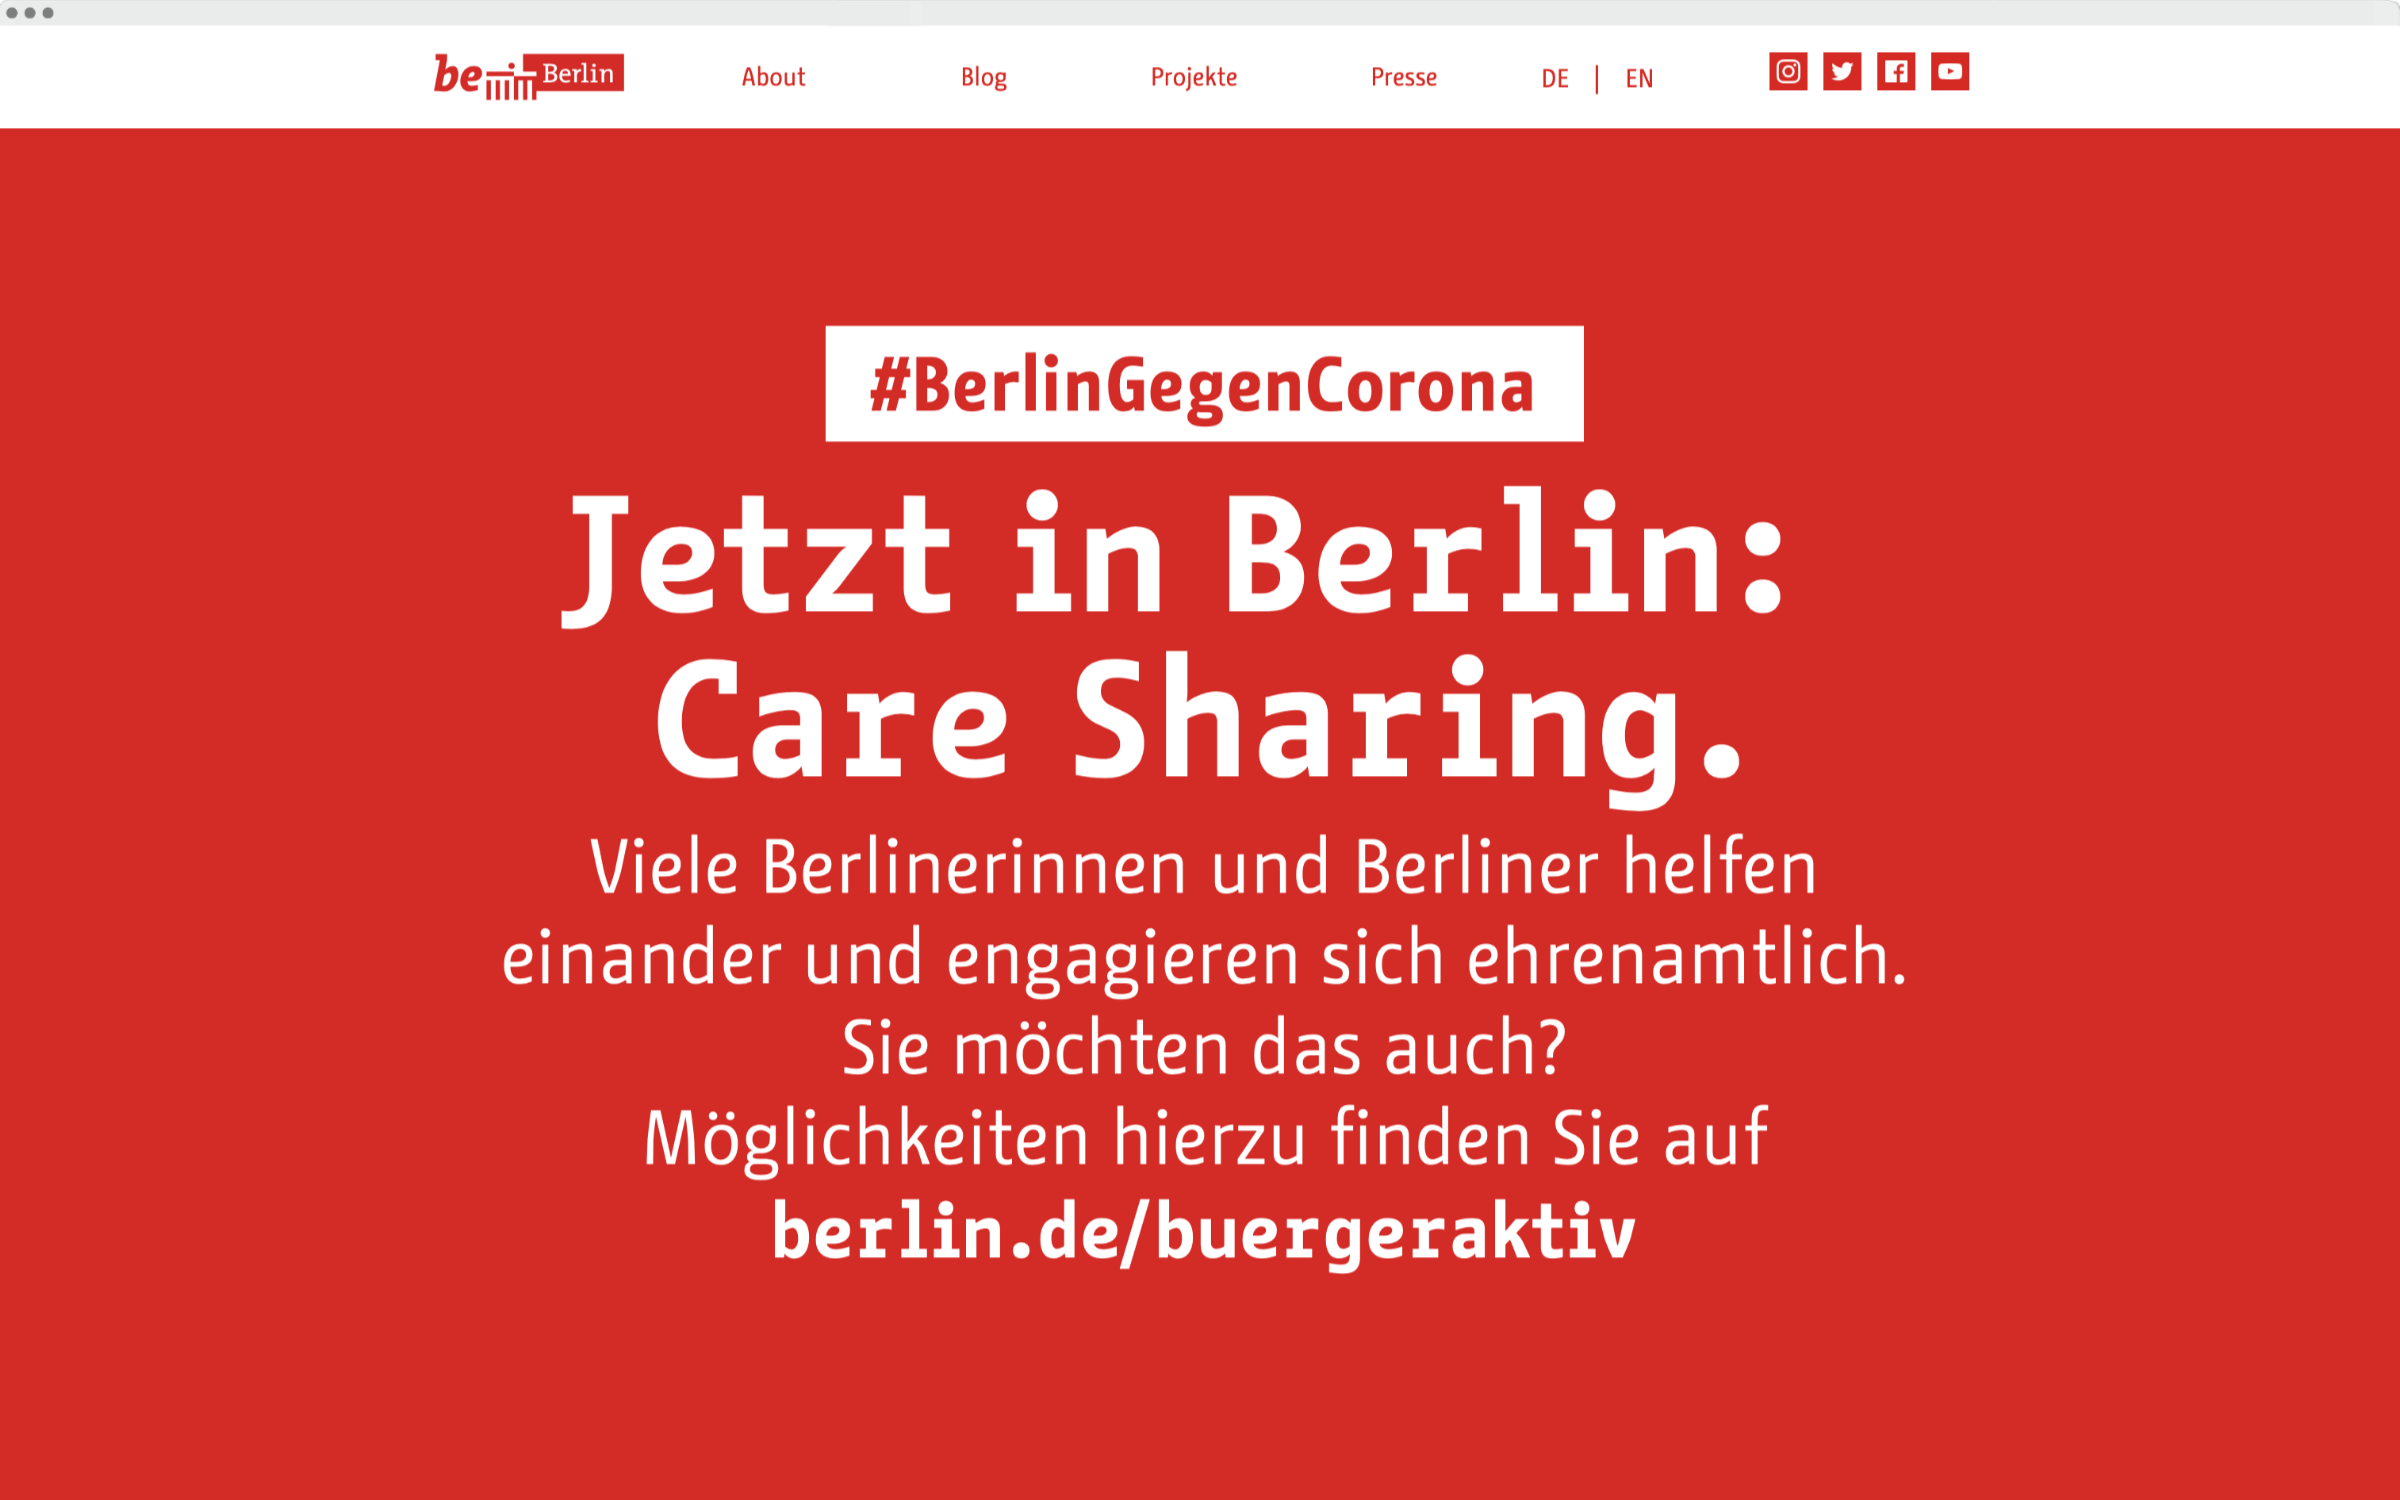 Change Letter (yet unreleased) and Change in use as Berlin’s corporate typeface – Corona websit